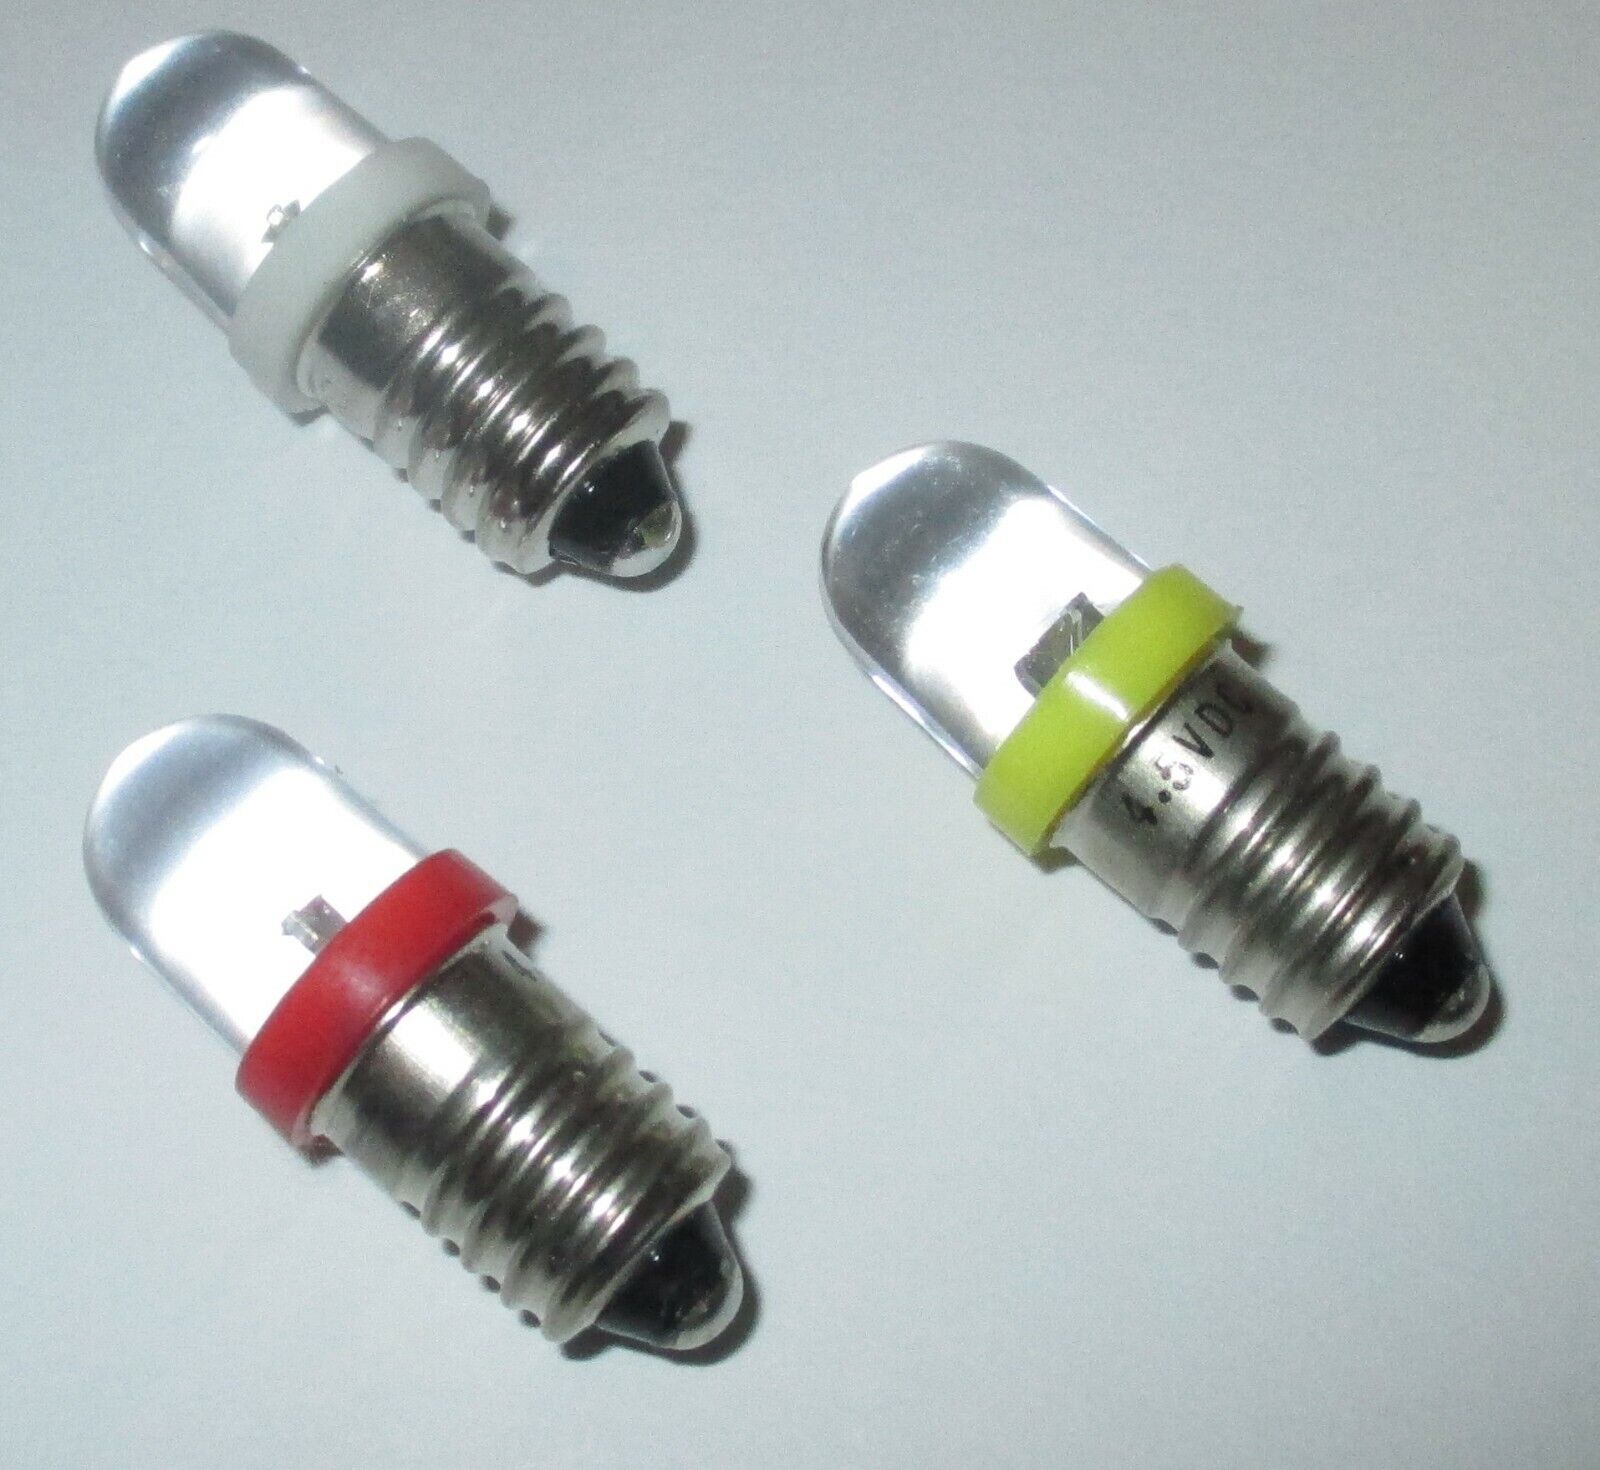 LED Screw Bulb 上質 【受注生産品】 3 5-4 5 Volt selection: E10 Red Y Clear Sockets